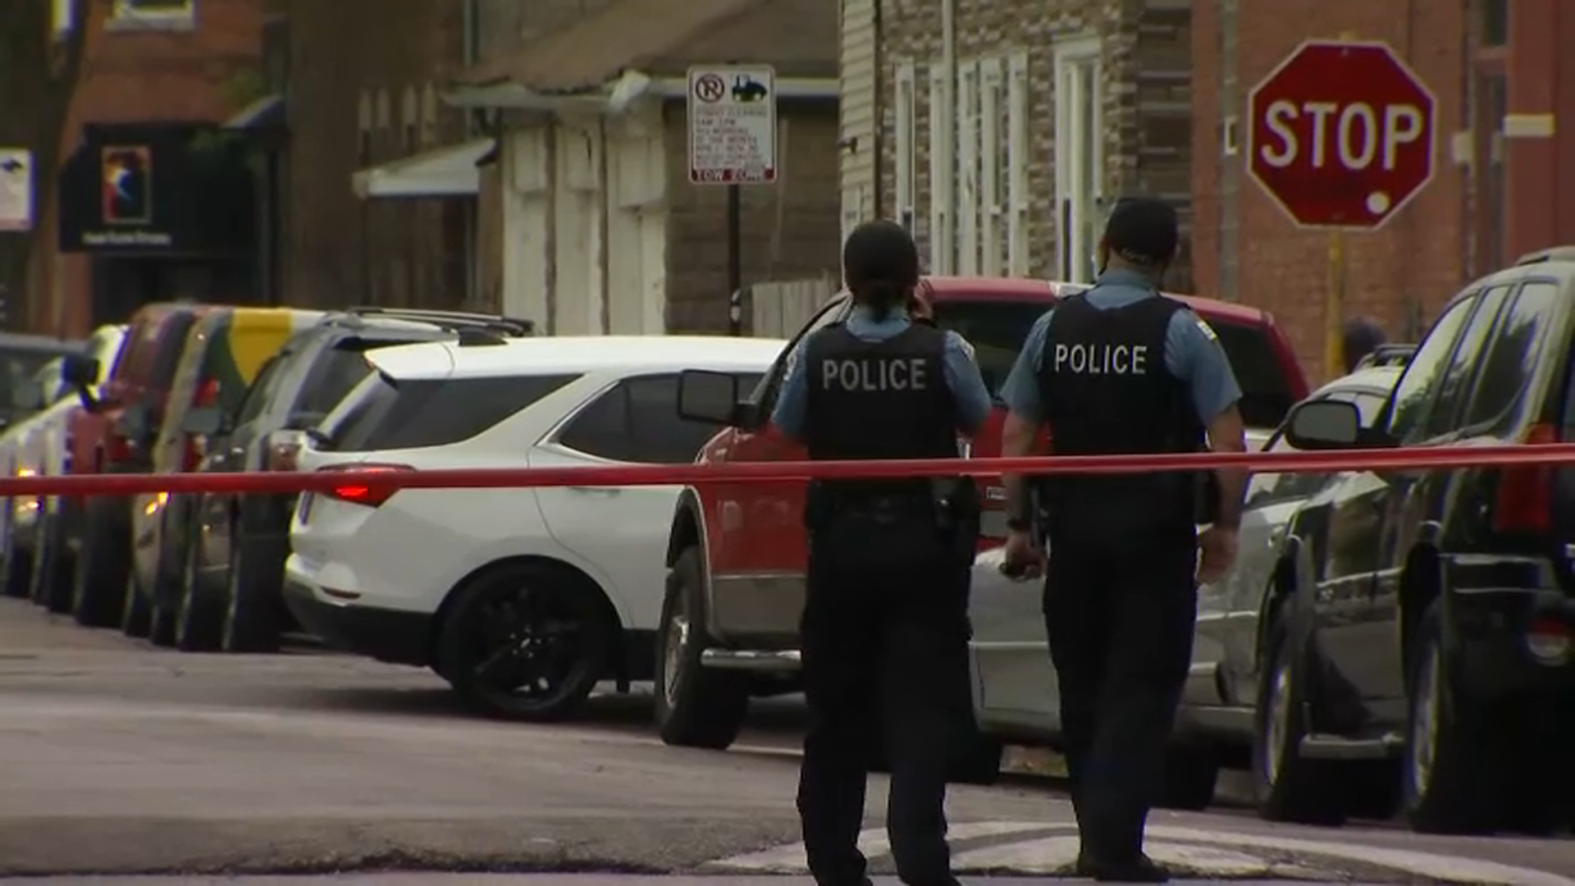 Chicago Violence 26 Shot, 6 Fatally, in Weekend Shootings NBC Chicago